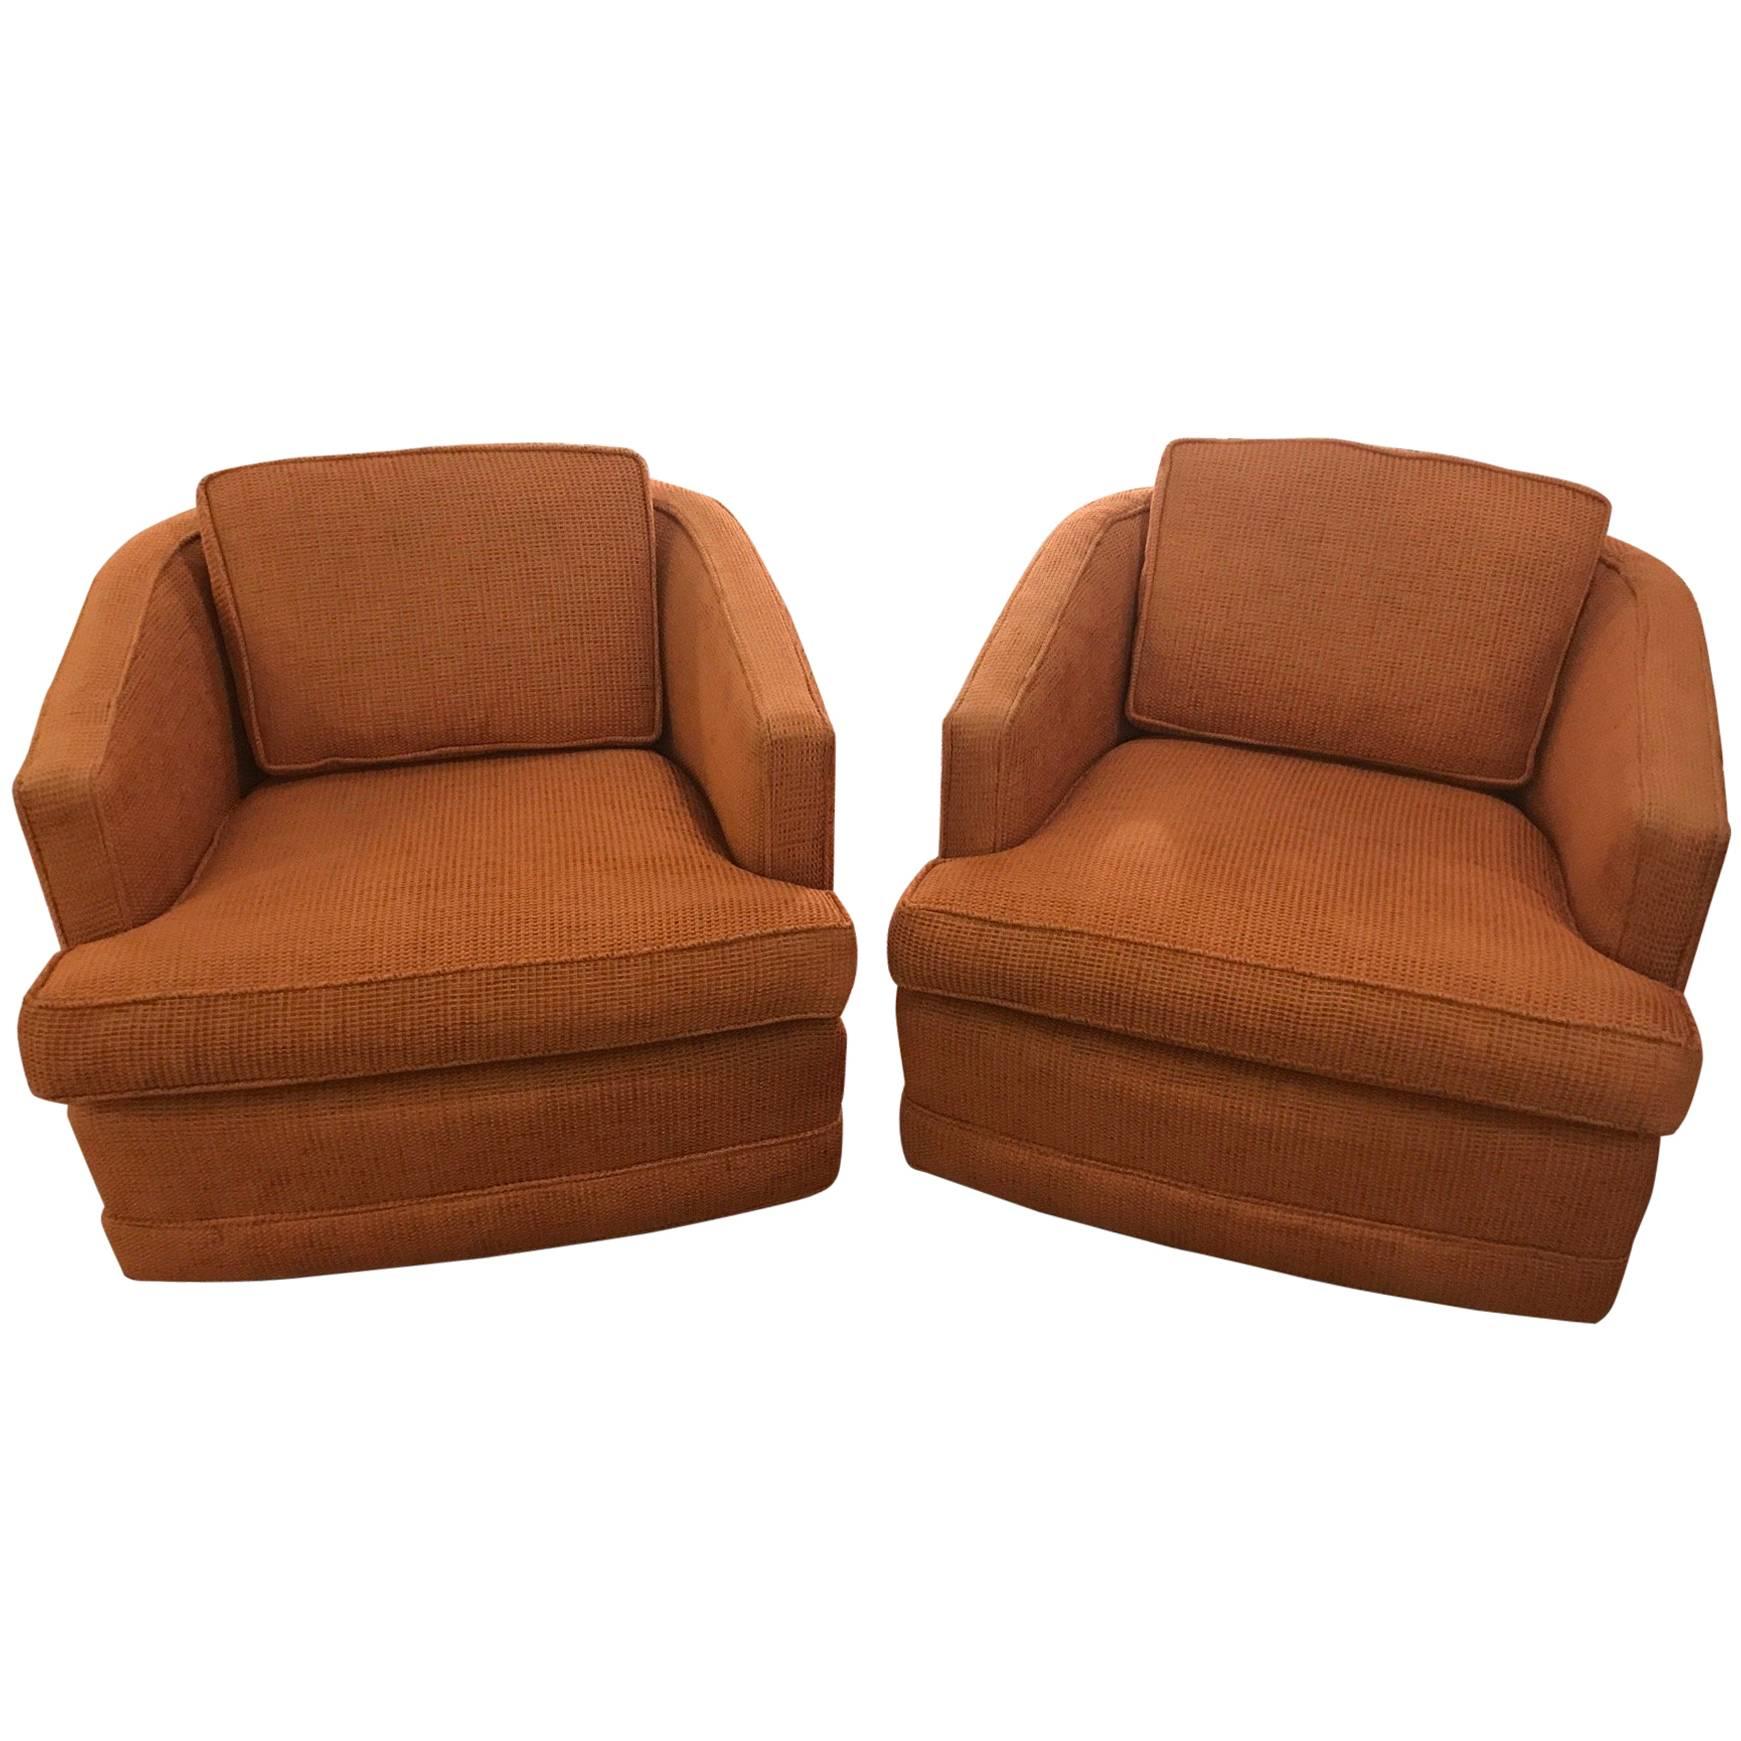 Pair of Swivel Tub Chairs Attributed to Milo Baughman